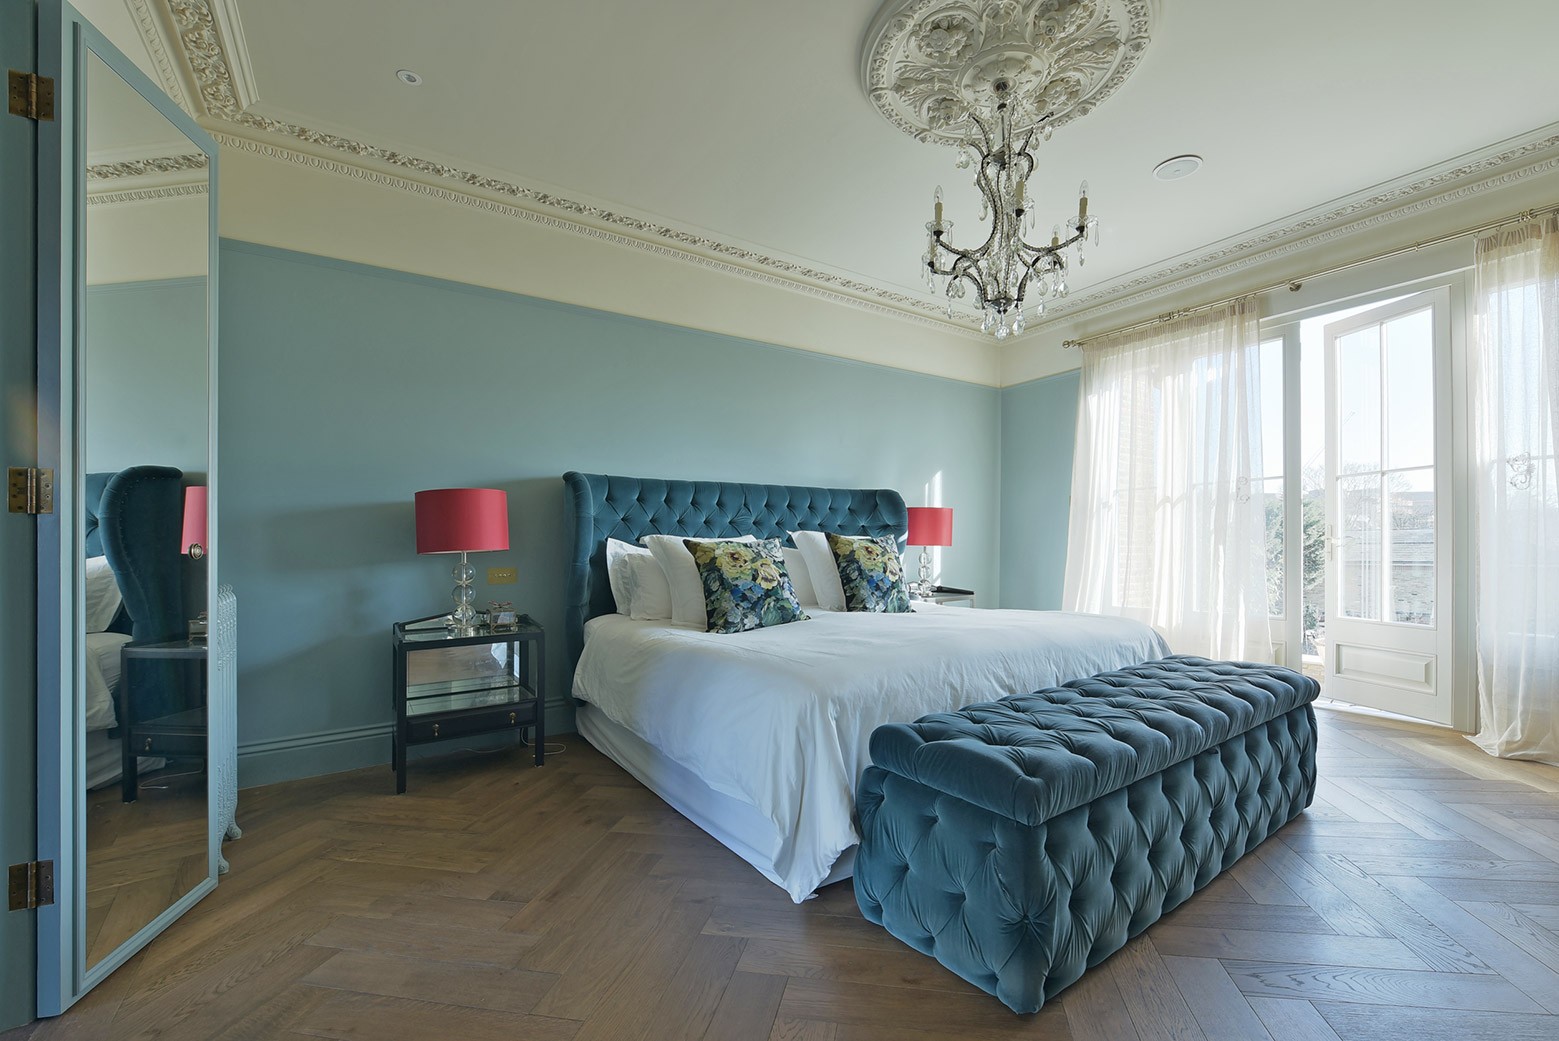 Just one of the many fabulous bedrooms on offer at Carlton House